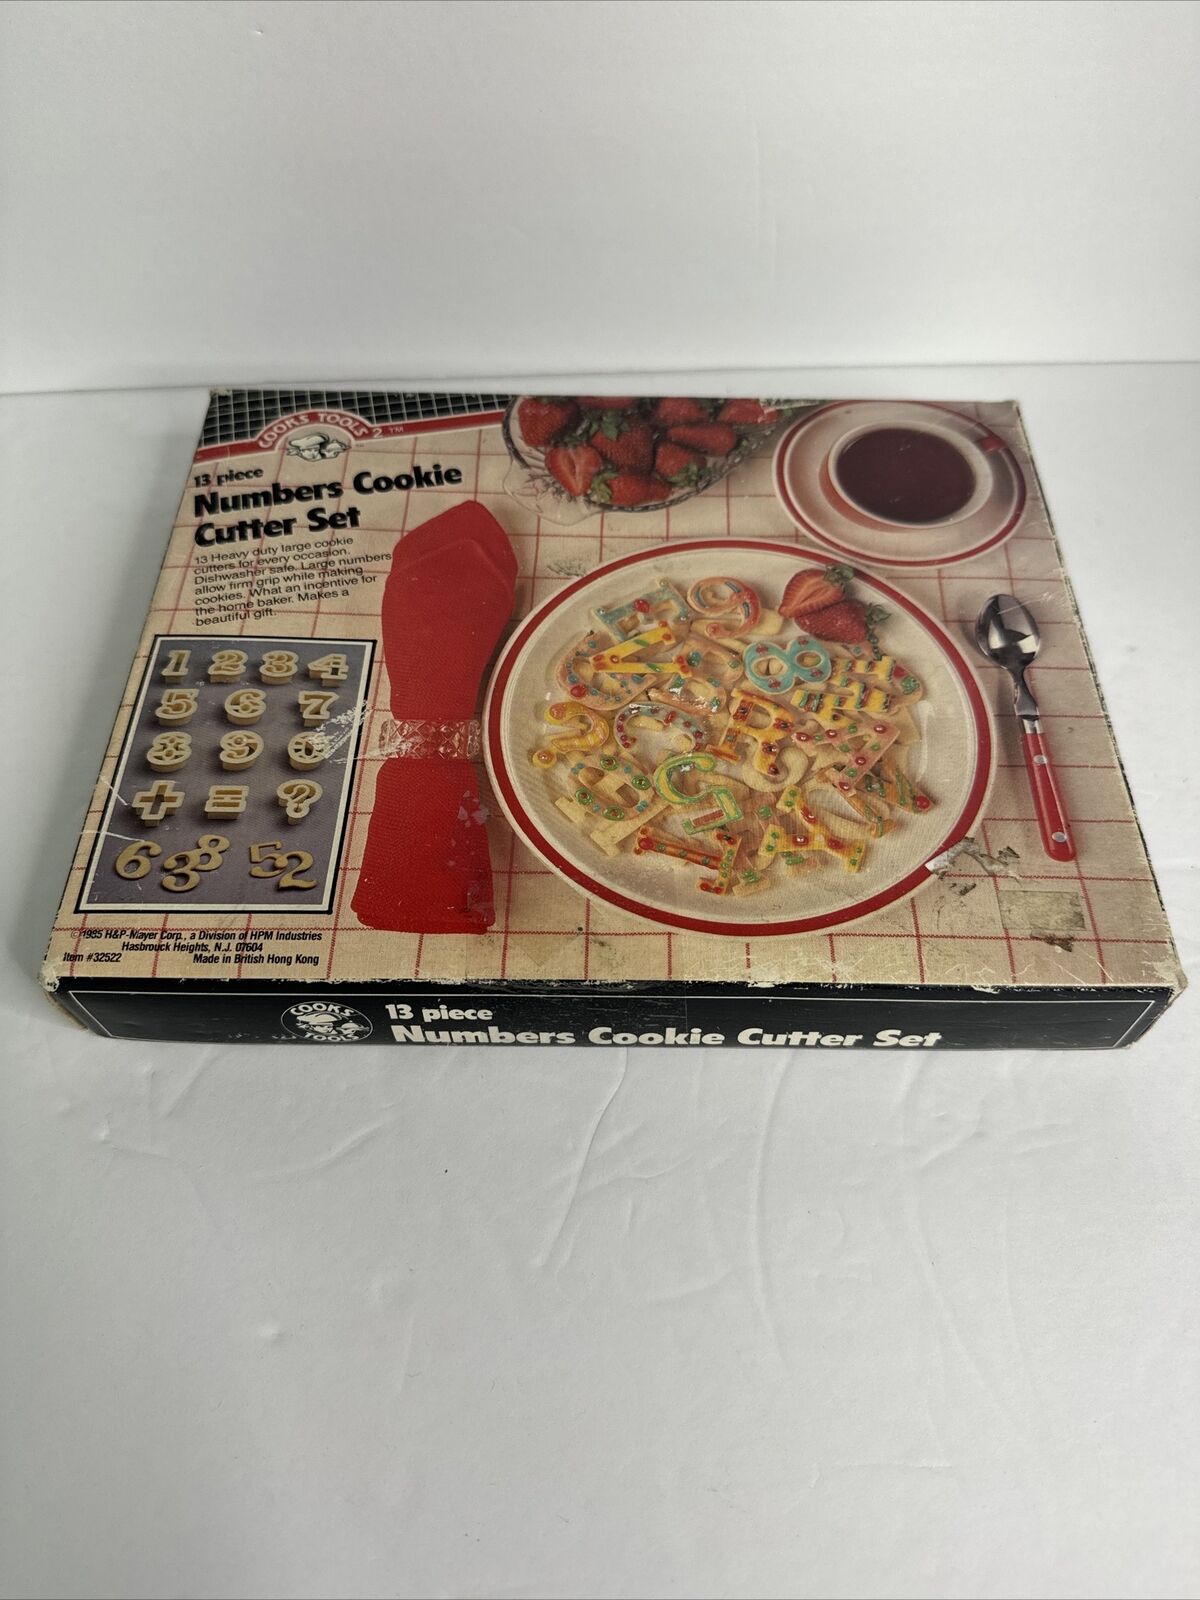 Vintage 13 piece Numbers Cookie Cutter Set Boxed 1985 heavy duty made Hong Kong